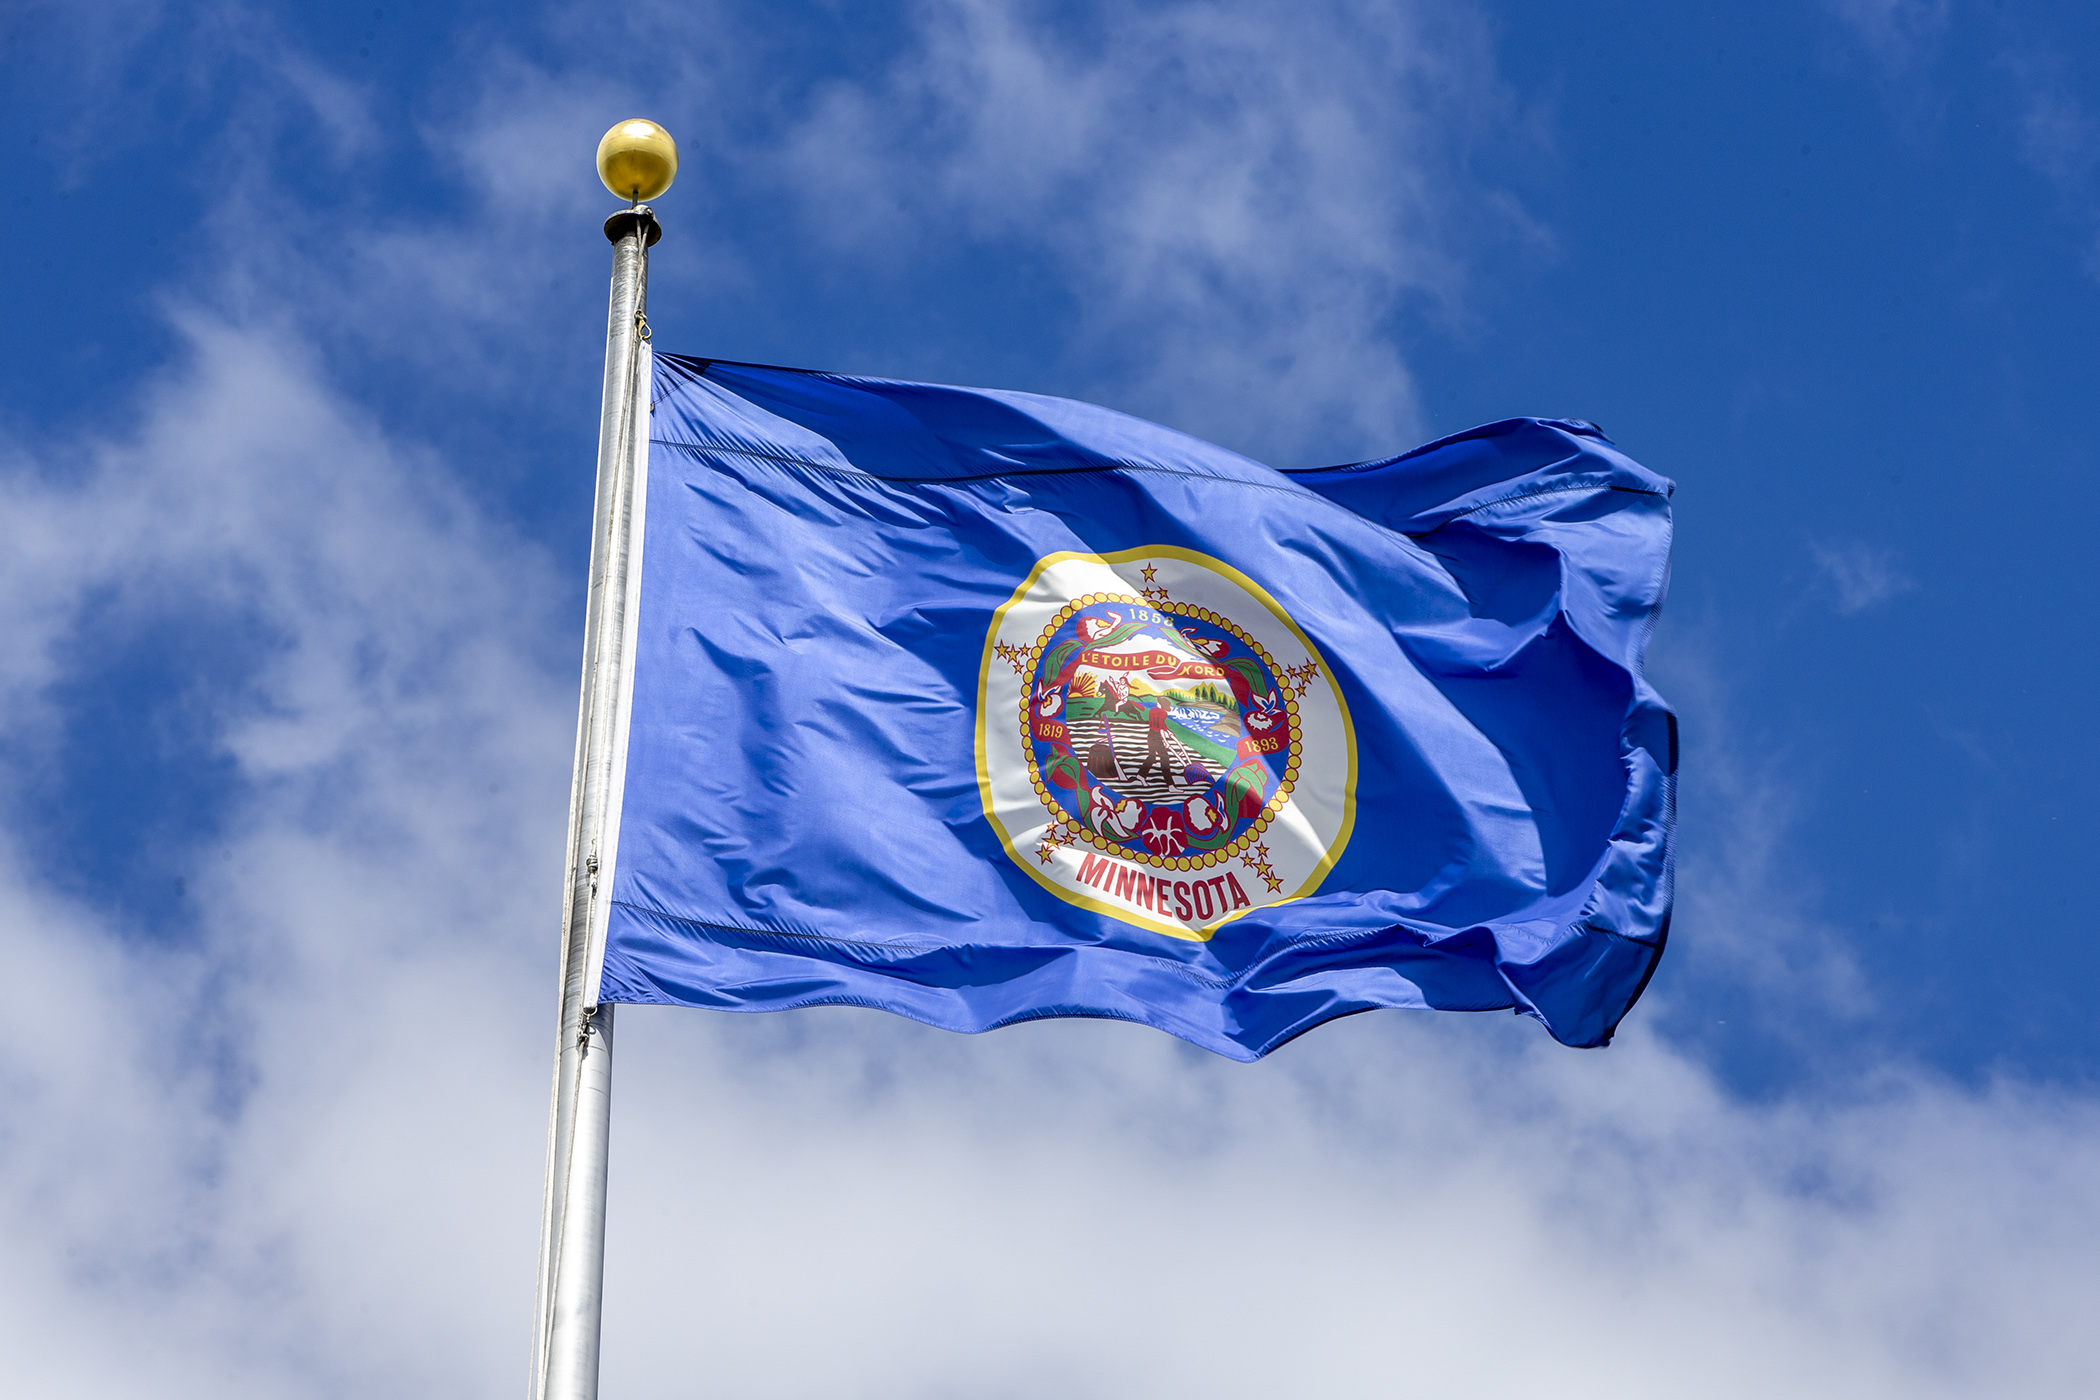 Minnesota's Bold Move: Why the State Adopted a New Flag